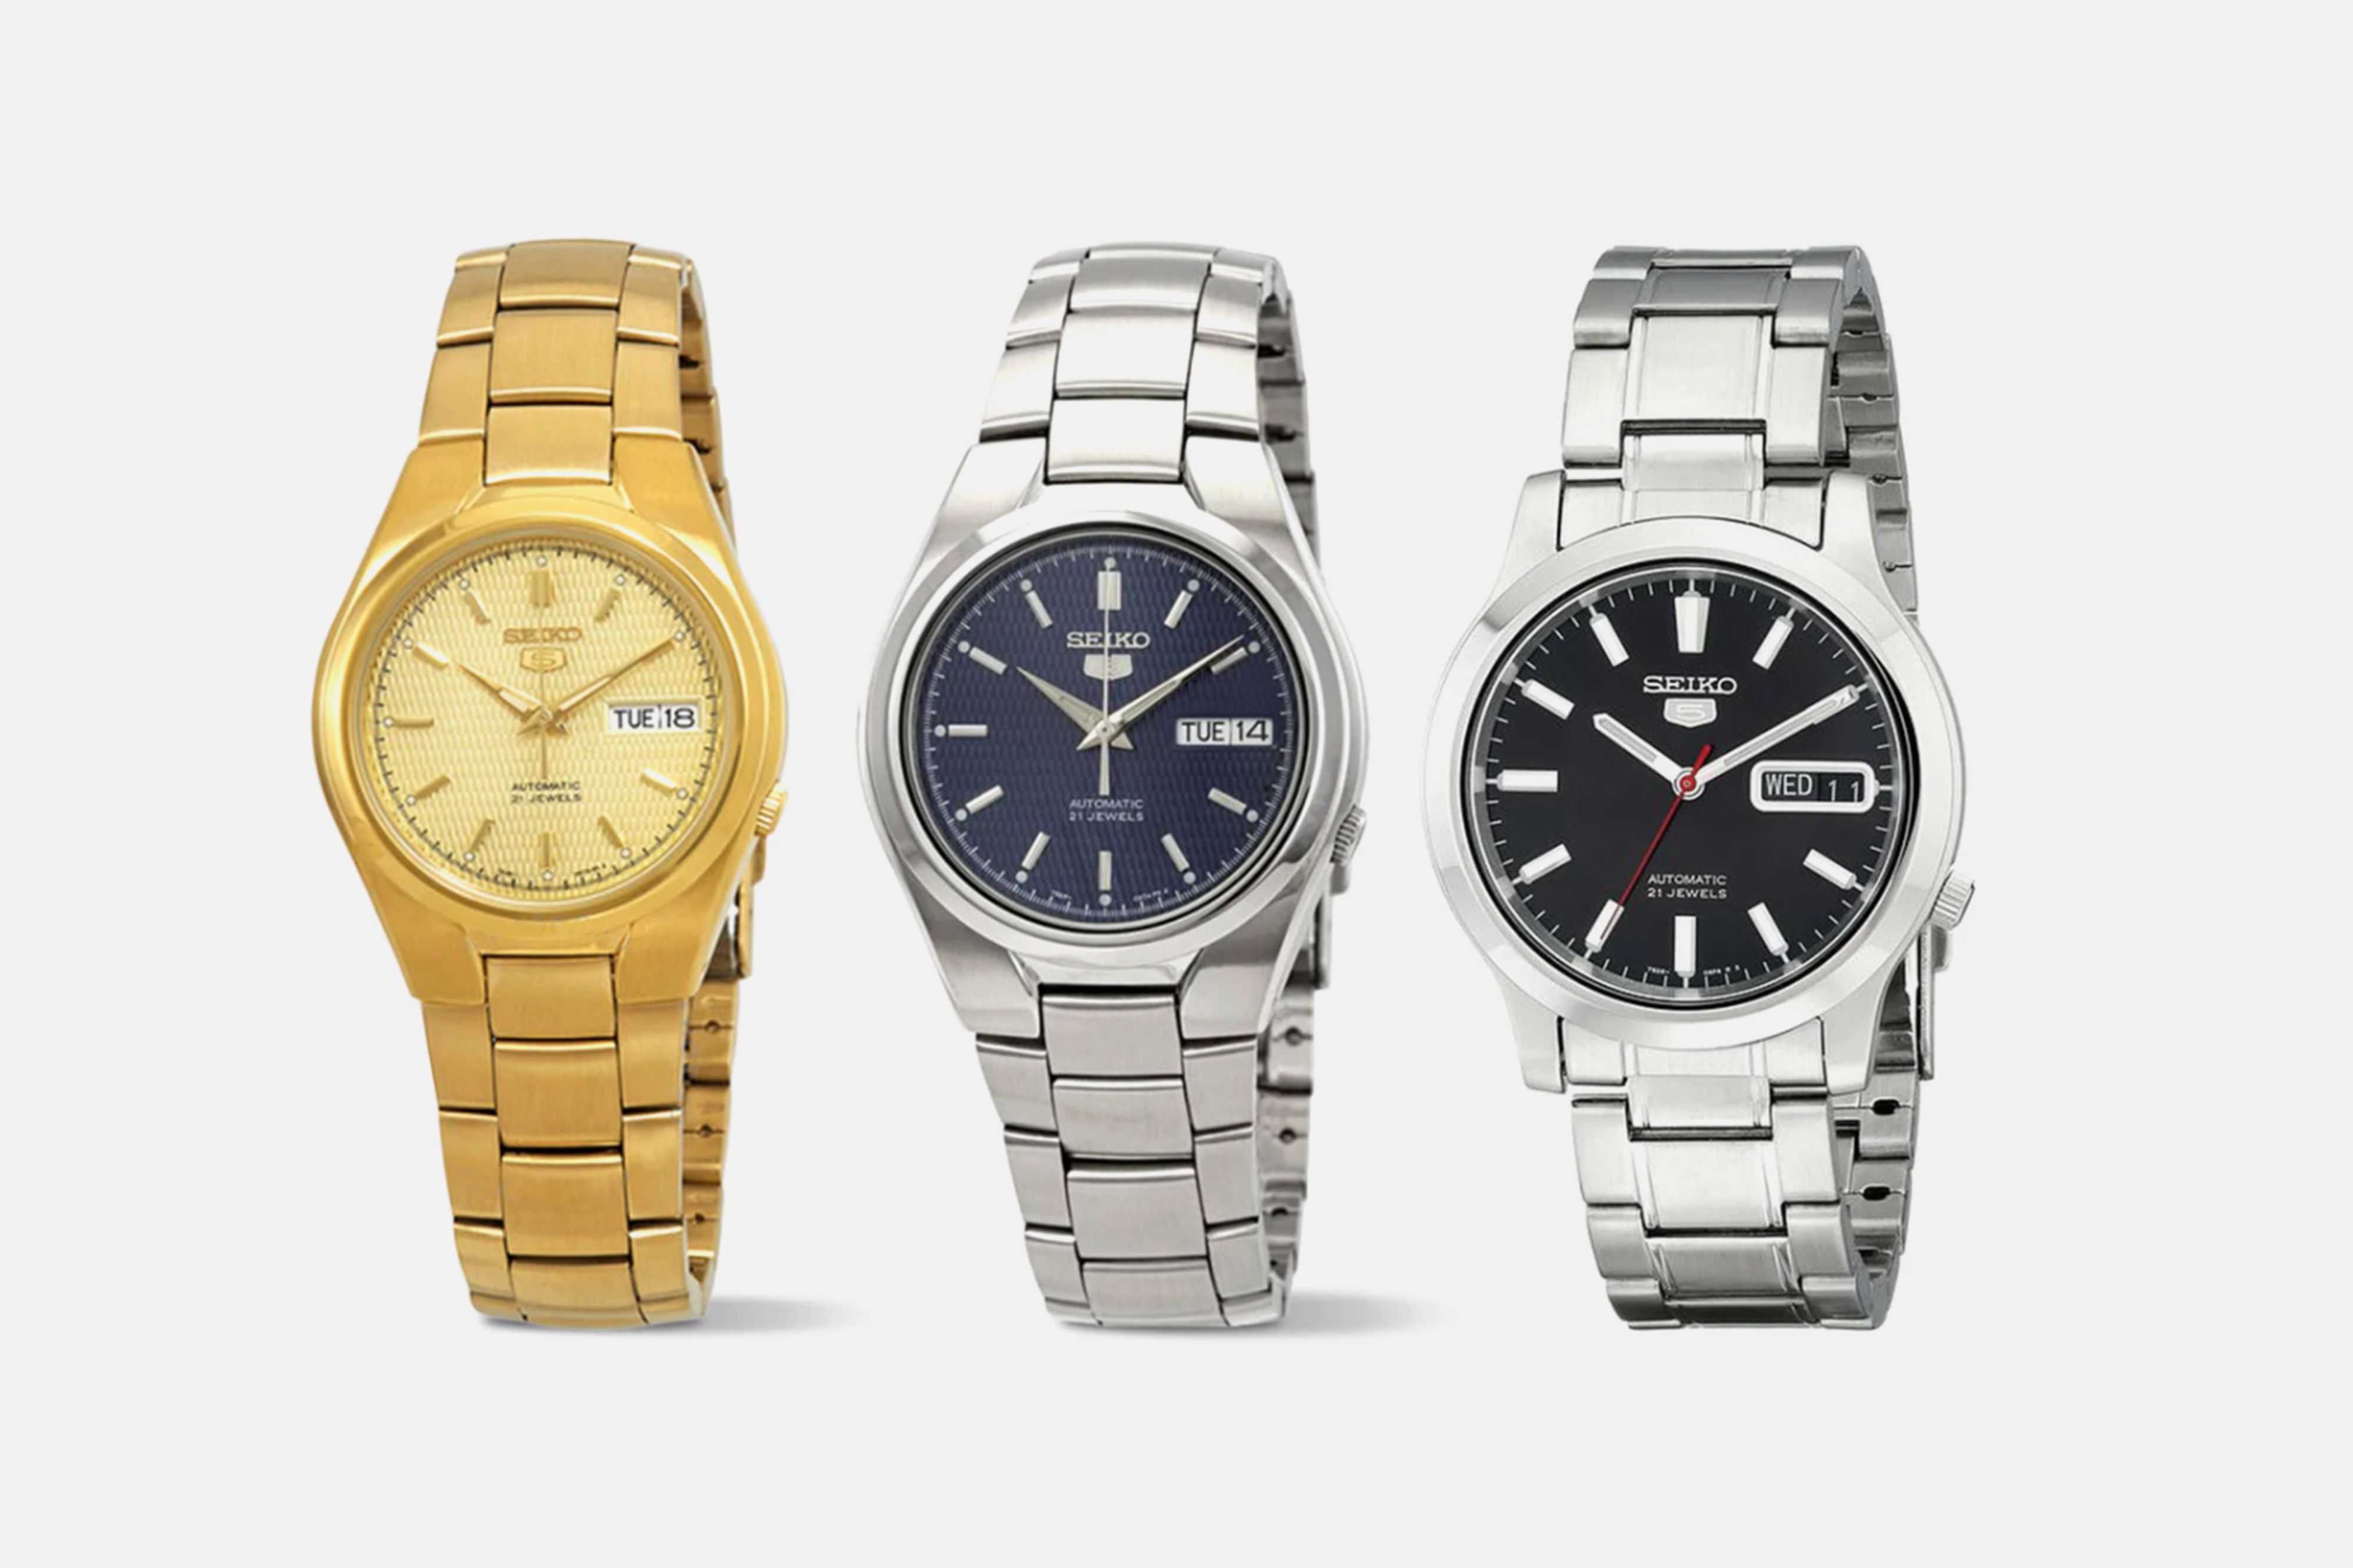 Seiko 5 Automatic Watches Are 50% Off